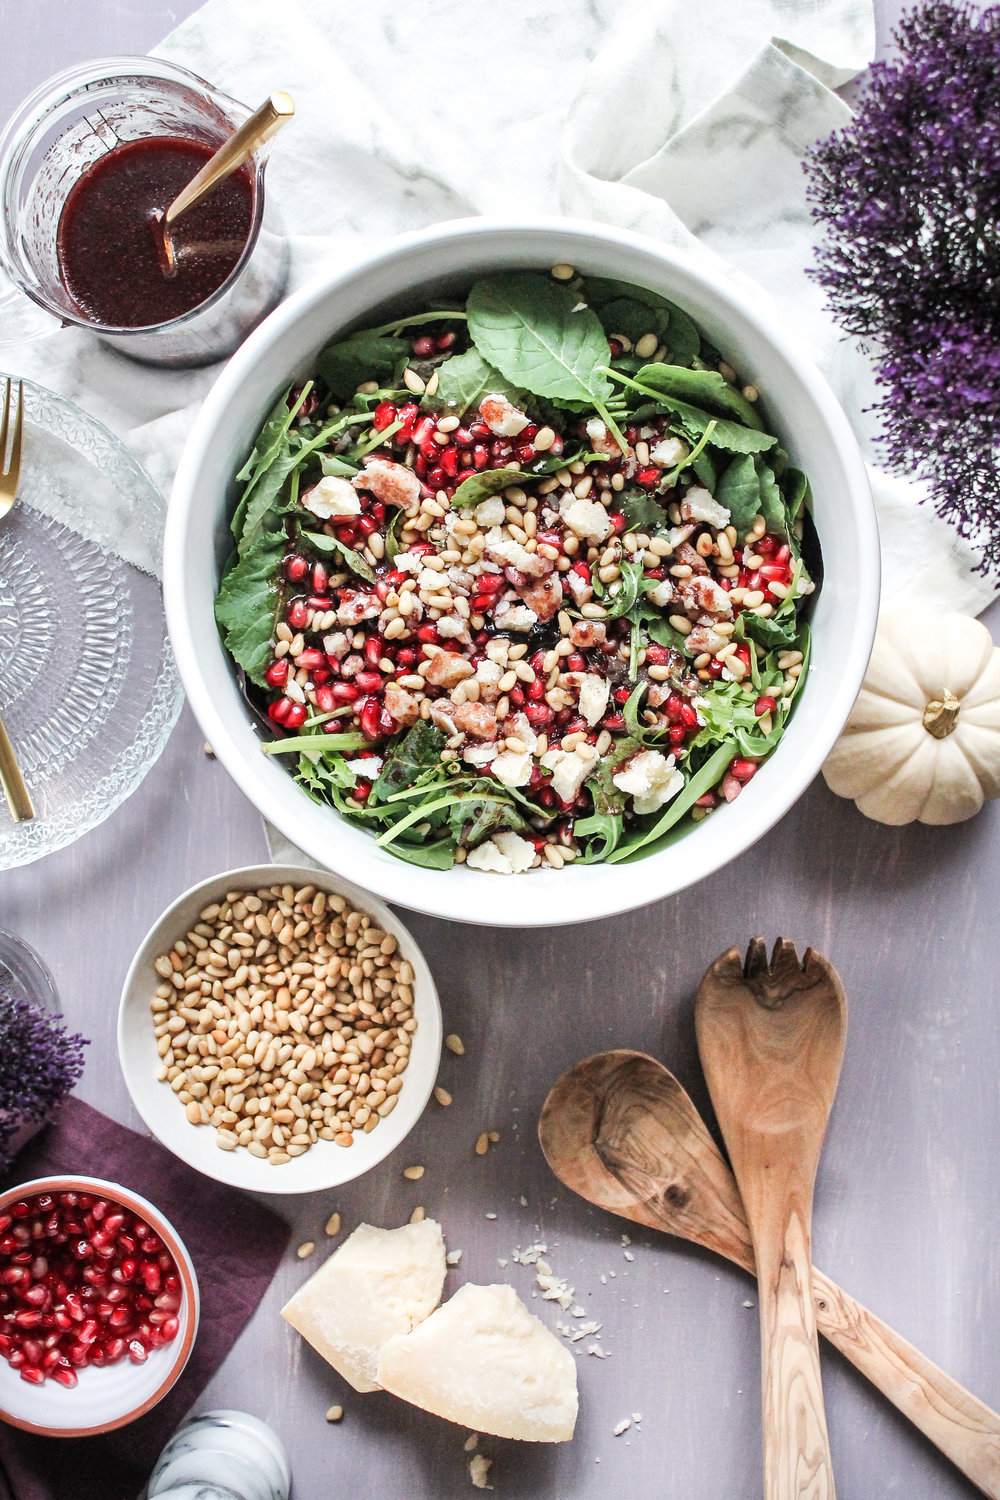 Mixed+Greens+Salad+with+Pomegranate,+Pine+Nuts,+and+Pomegranate+Merlot+Vinaigrette+[+www.pedanticfoodie.jpg